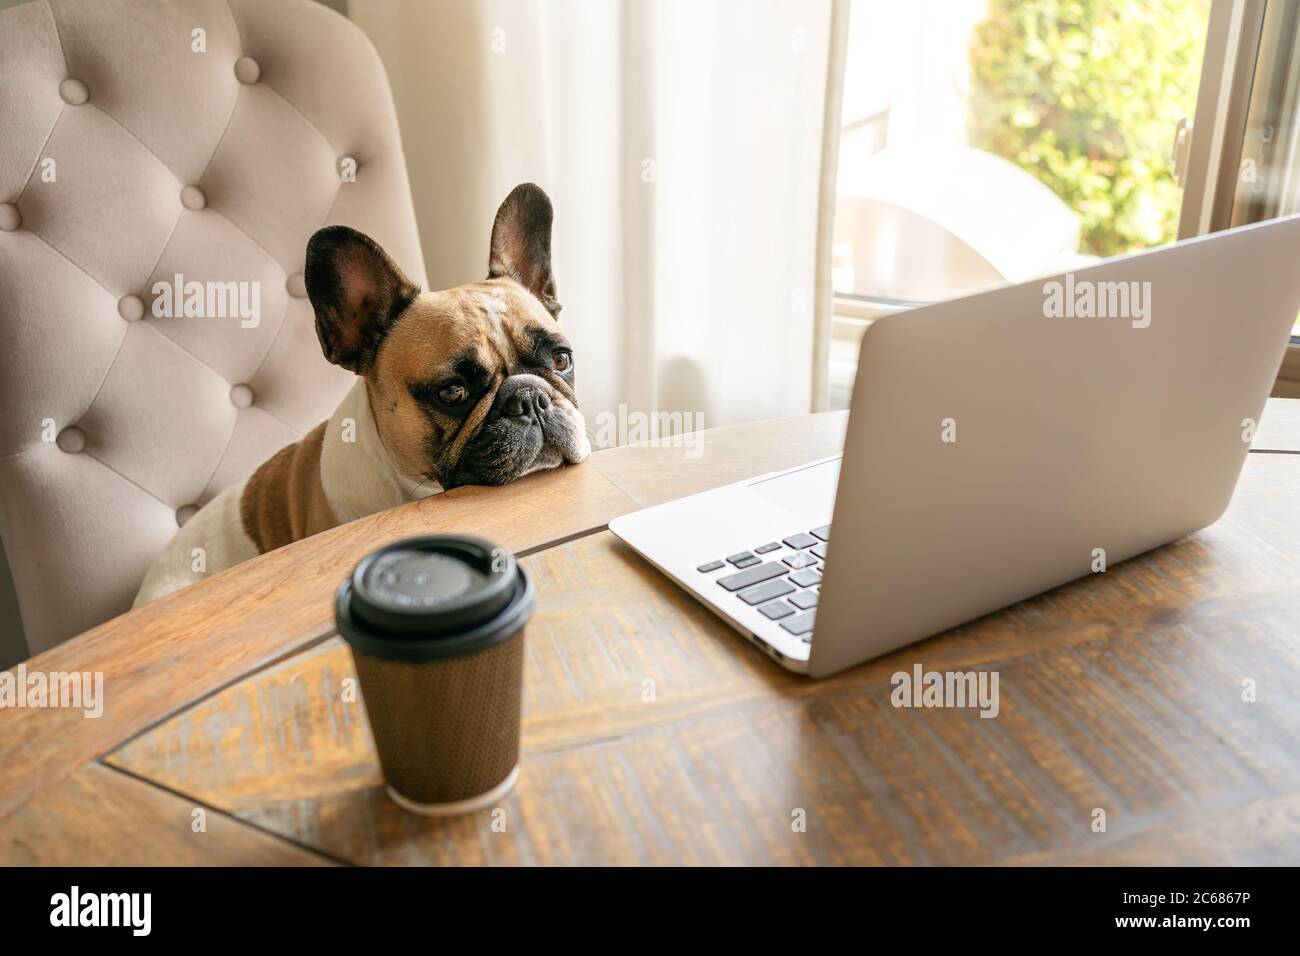 French bulldog sitting on a chair and looking tired at the camera during work on laptop what stay on a table with coffee cup. Stock Photo